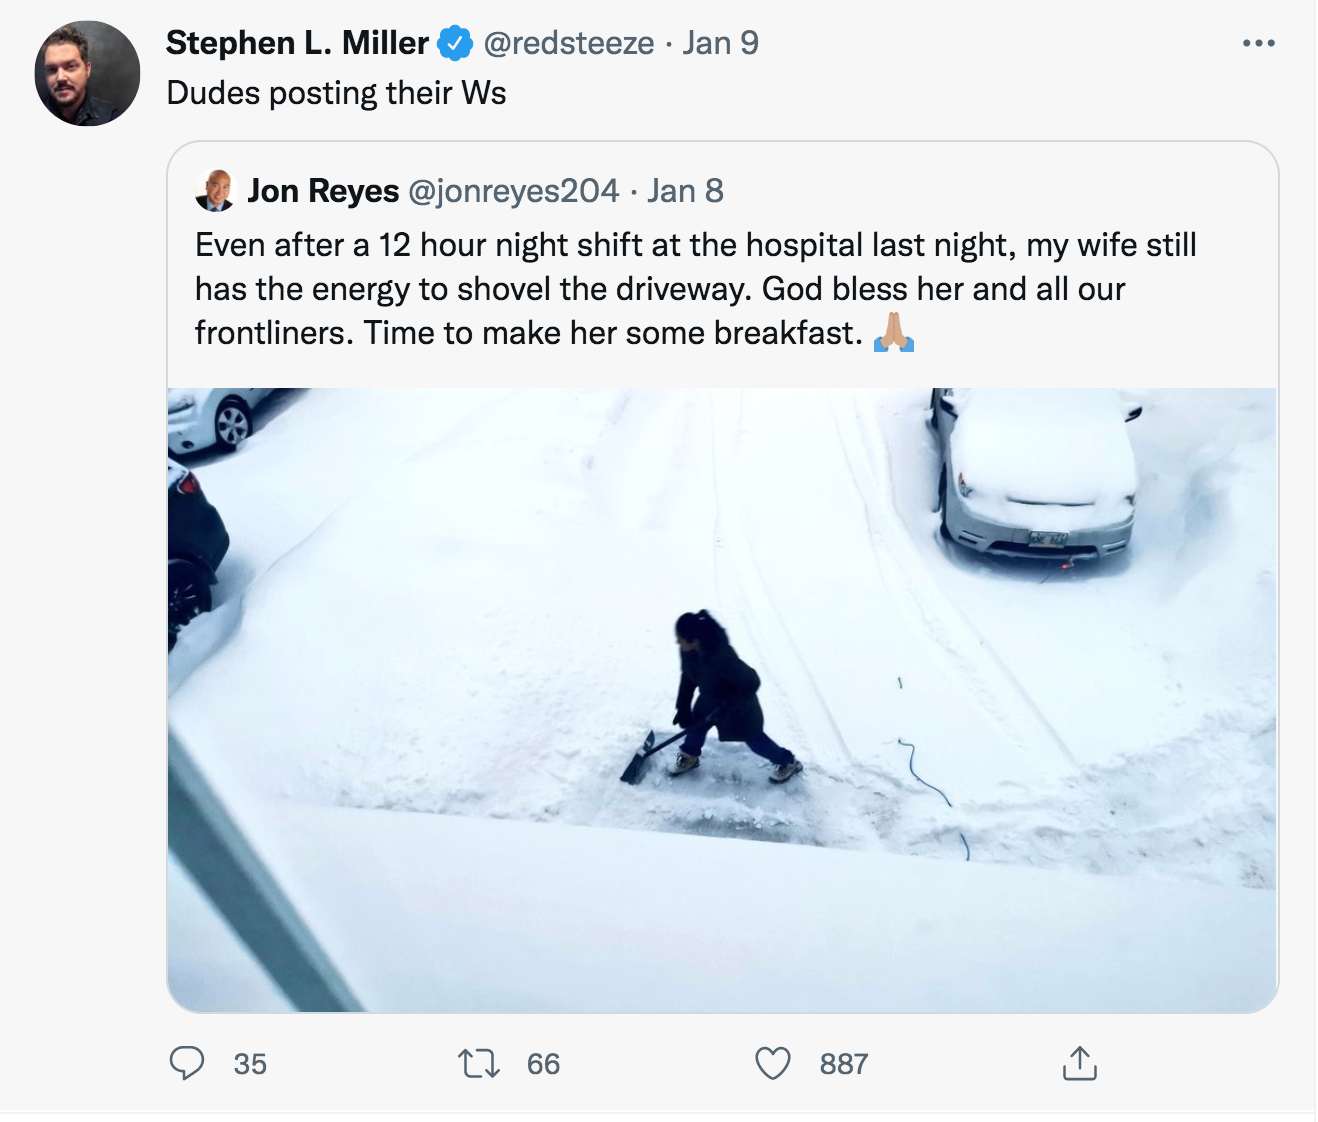 Husband Roasts For Snow Shoveling Tweet - snow - 09 Stephen L. Miller Jan 9 Dudes posting their Ws Jon Reyes . Jan 8 Even after a 12 hour night shift at the hospital last night, my wife still has the energy to shovel the driveway. God bless her and all ou